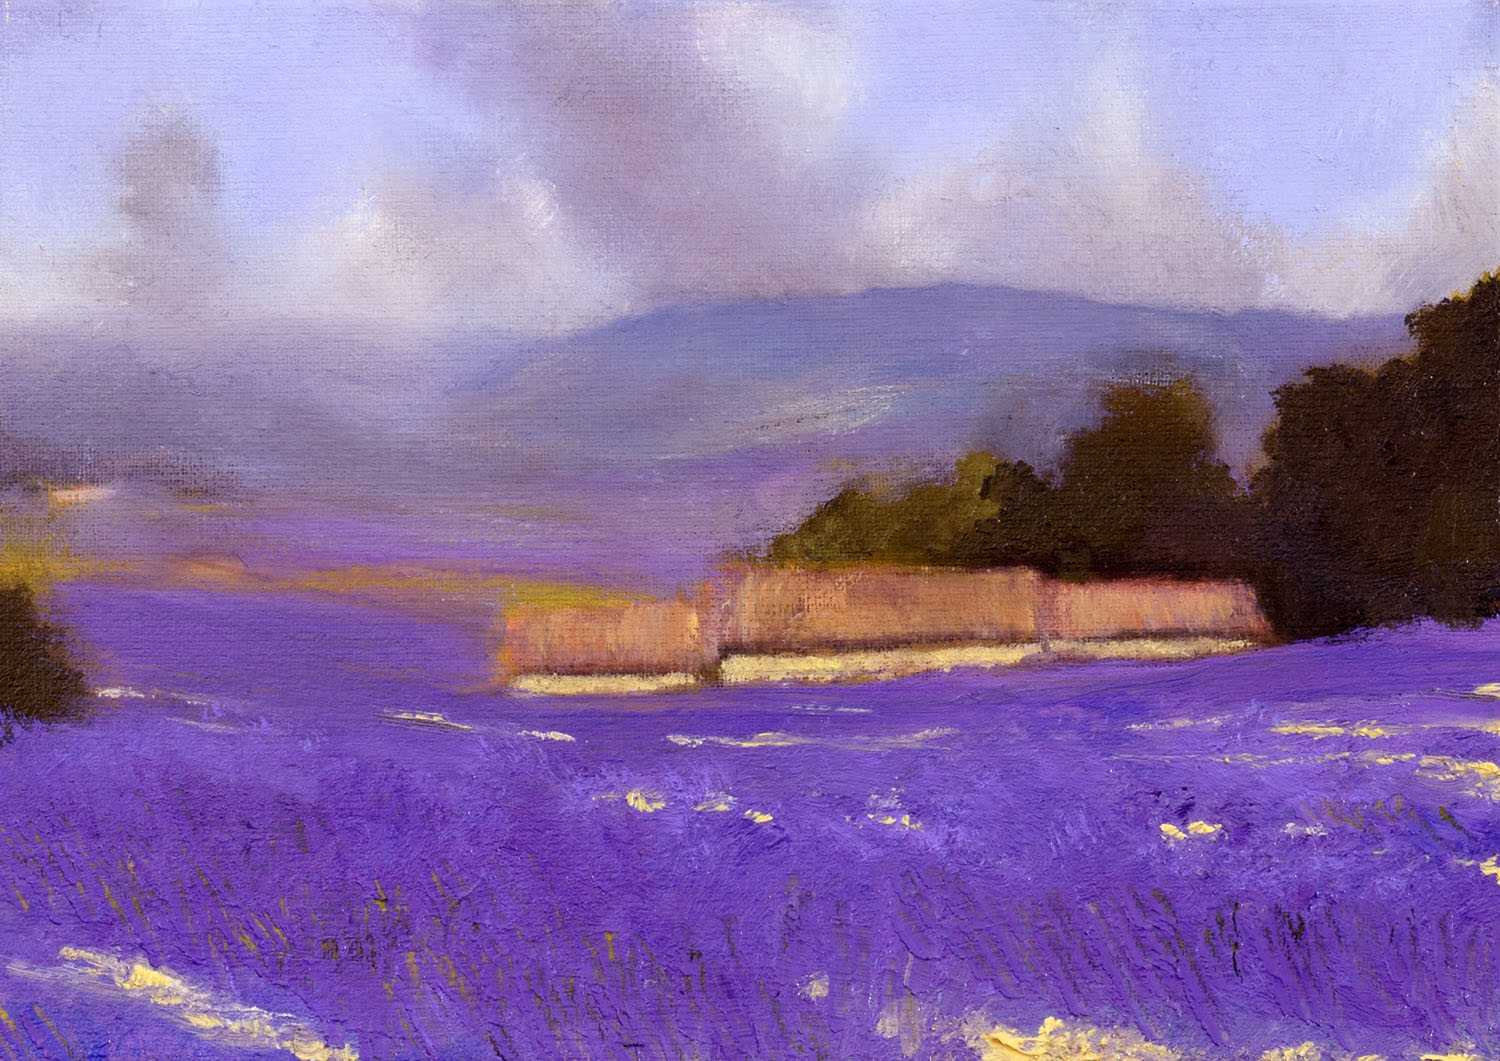 A landscape painting with a dazzling lavender field in full bloom | Evening in the Lavender fields by John O'Grady